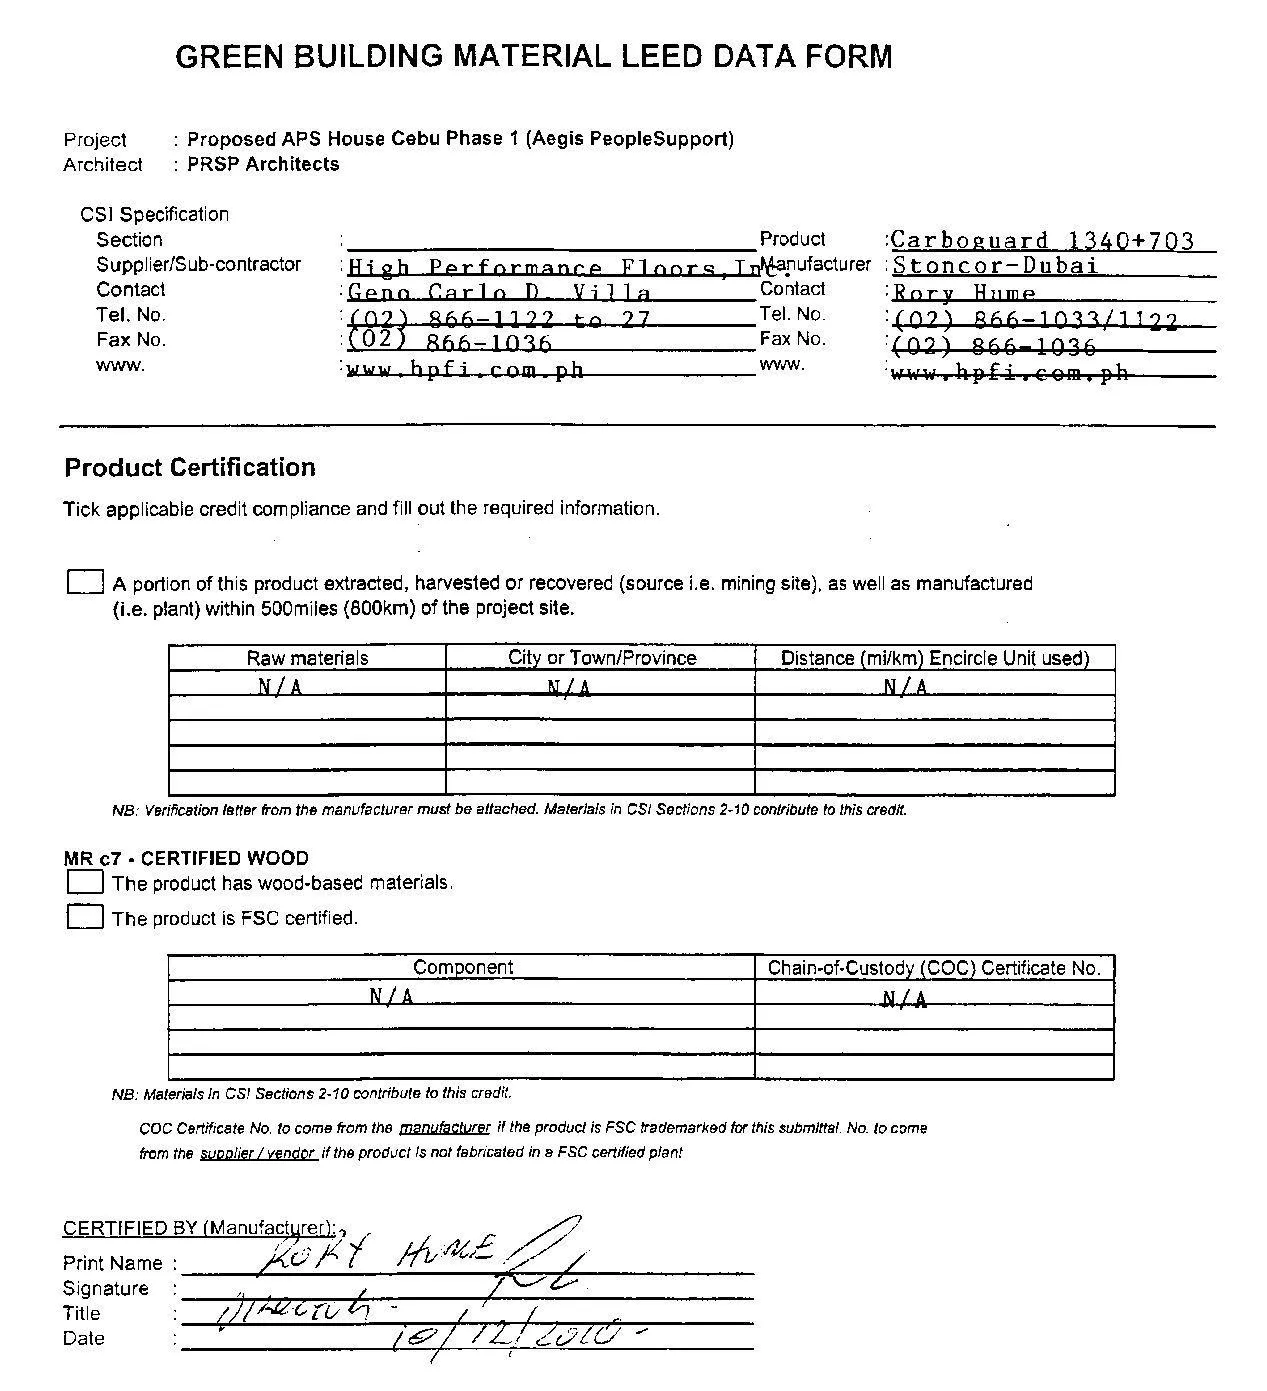 Green Building Material LEED Data Form